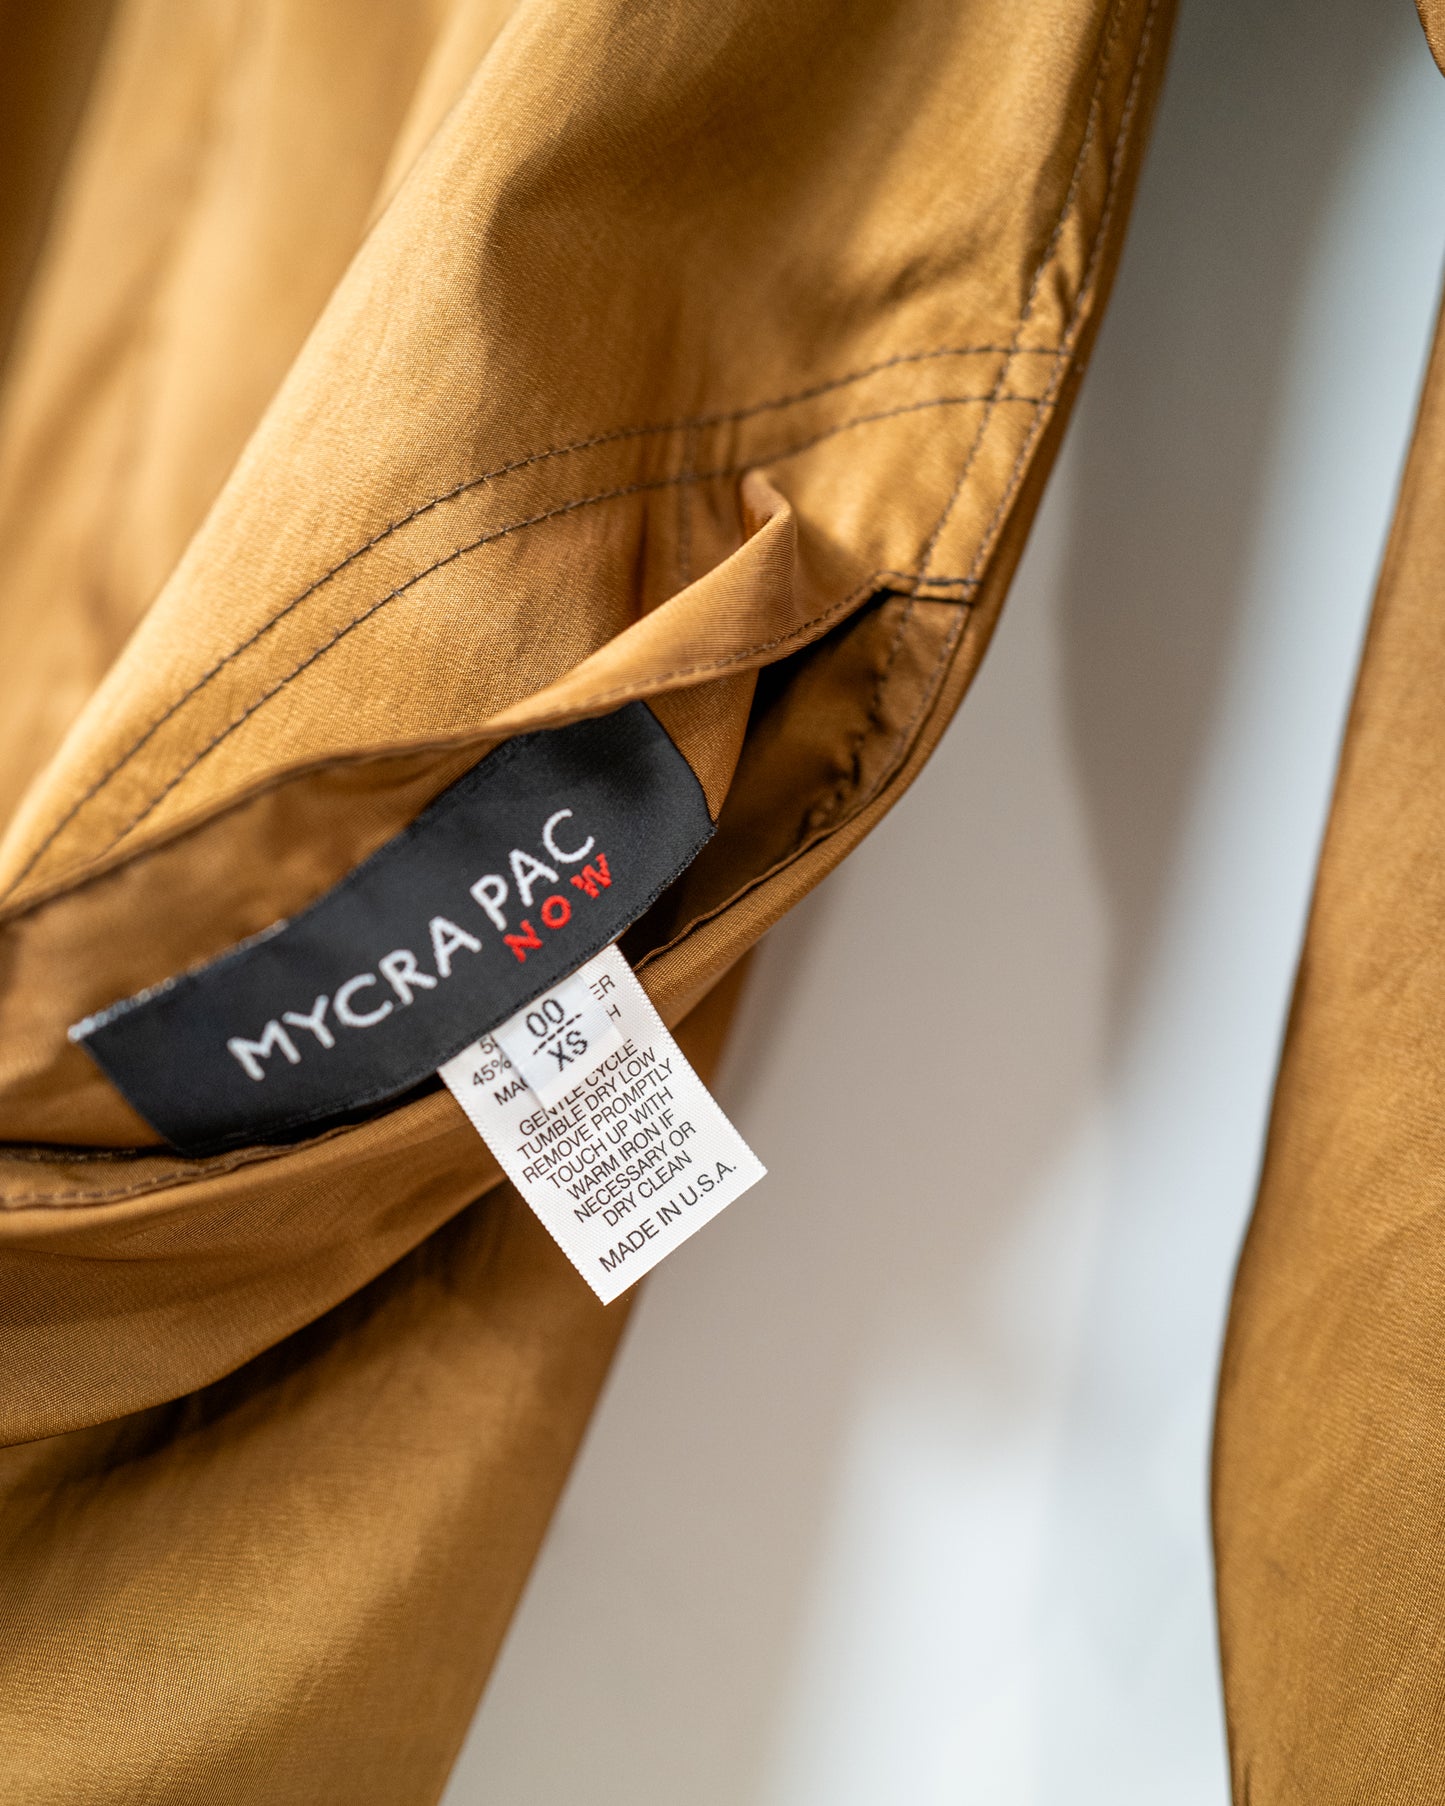 Reversible Jacket by Mycra Pac - Size Small